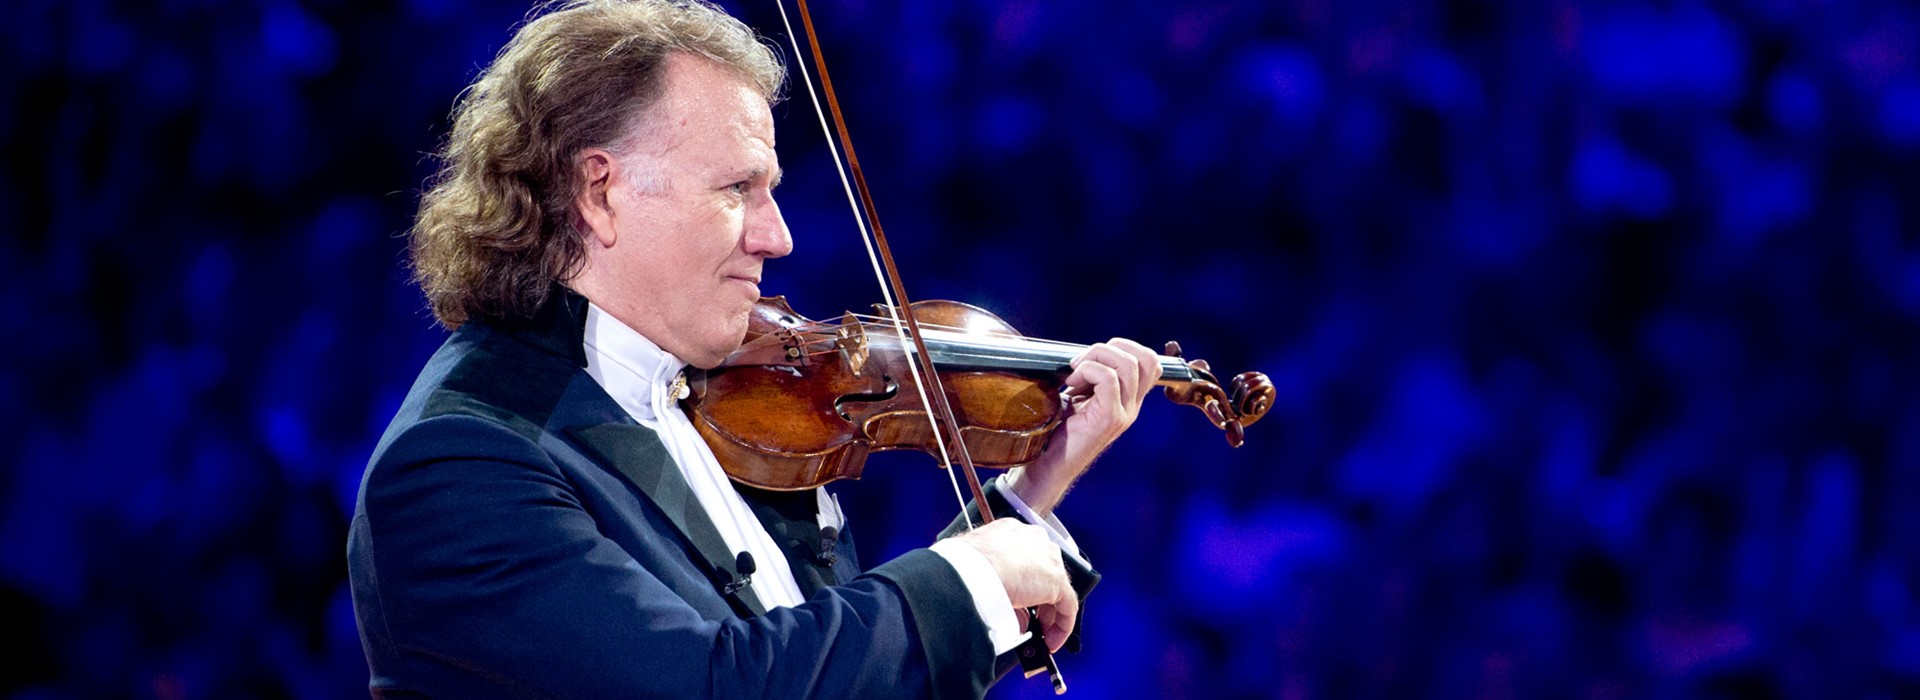 tourhub | Newmarket Holidays | Andre Rieu, 4 days in London 